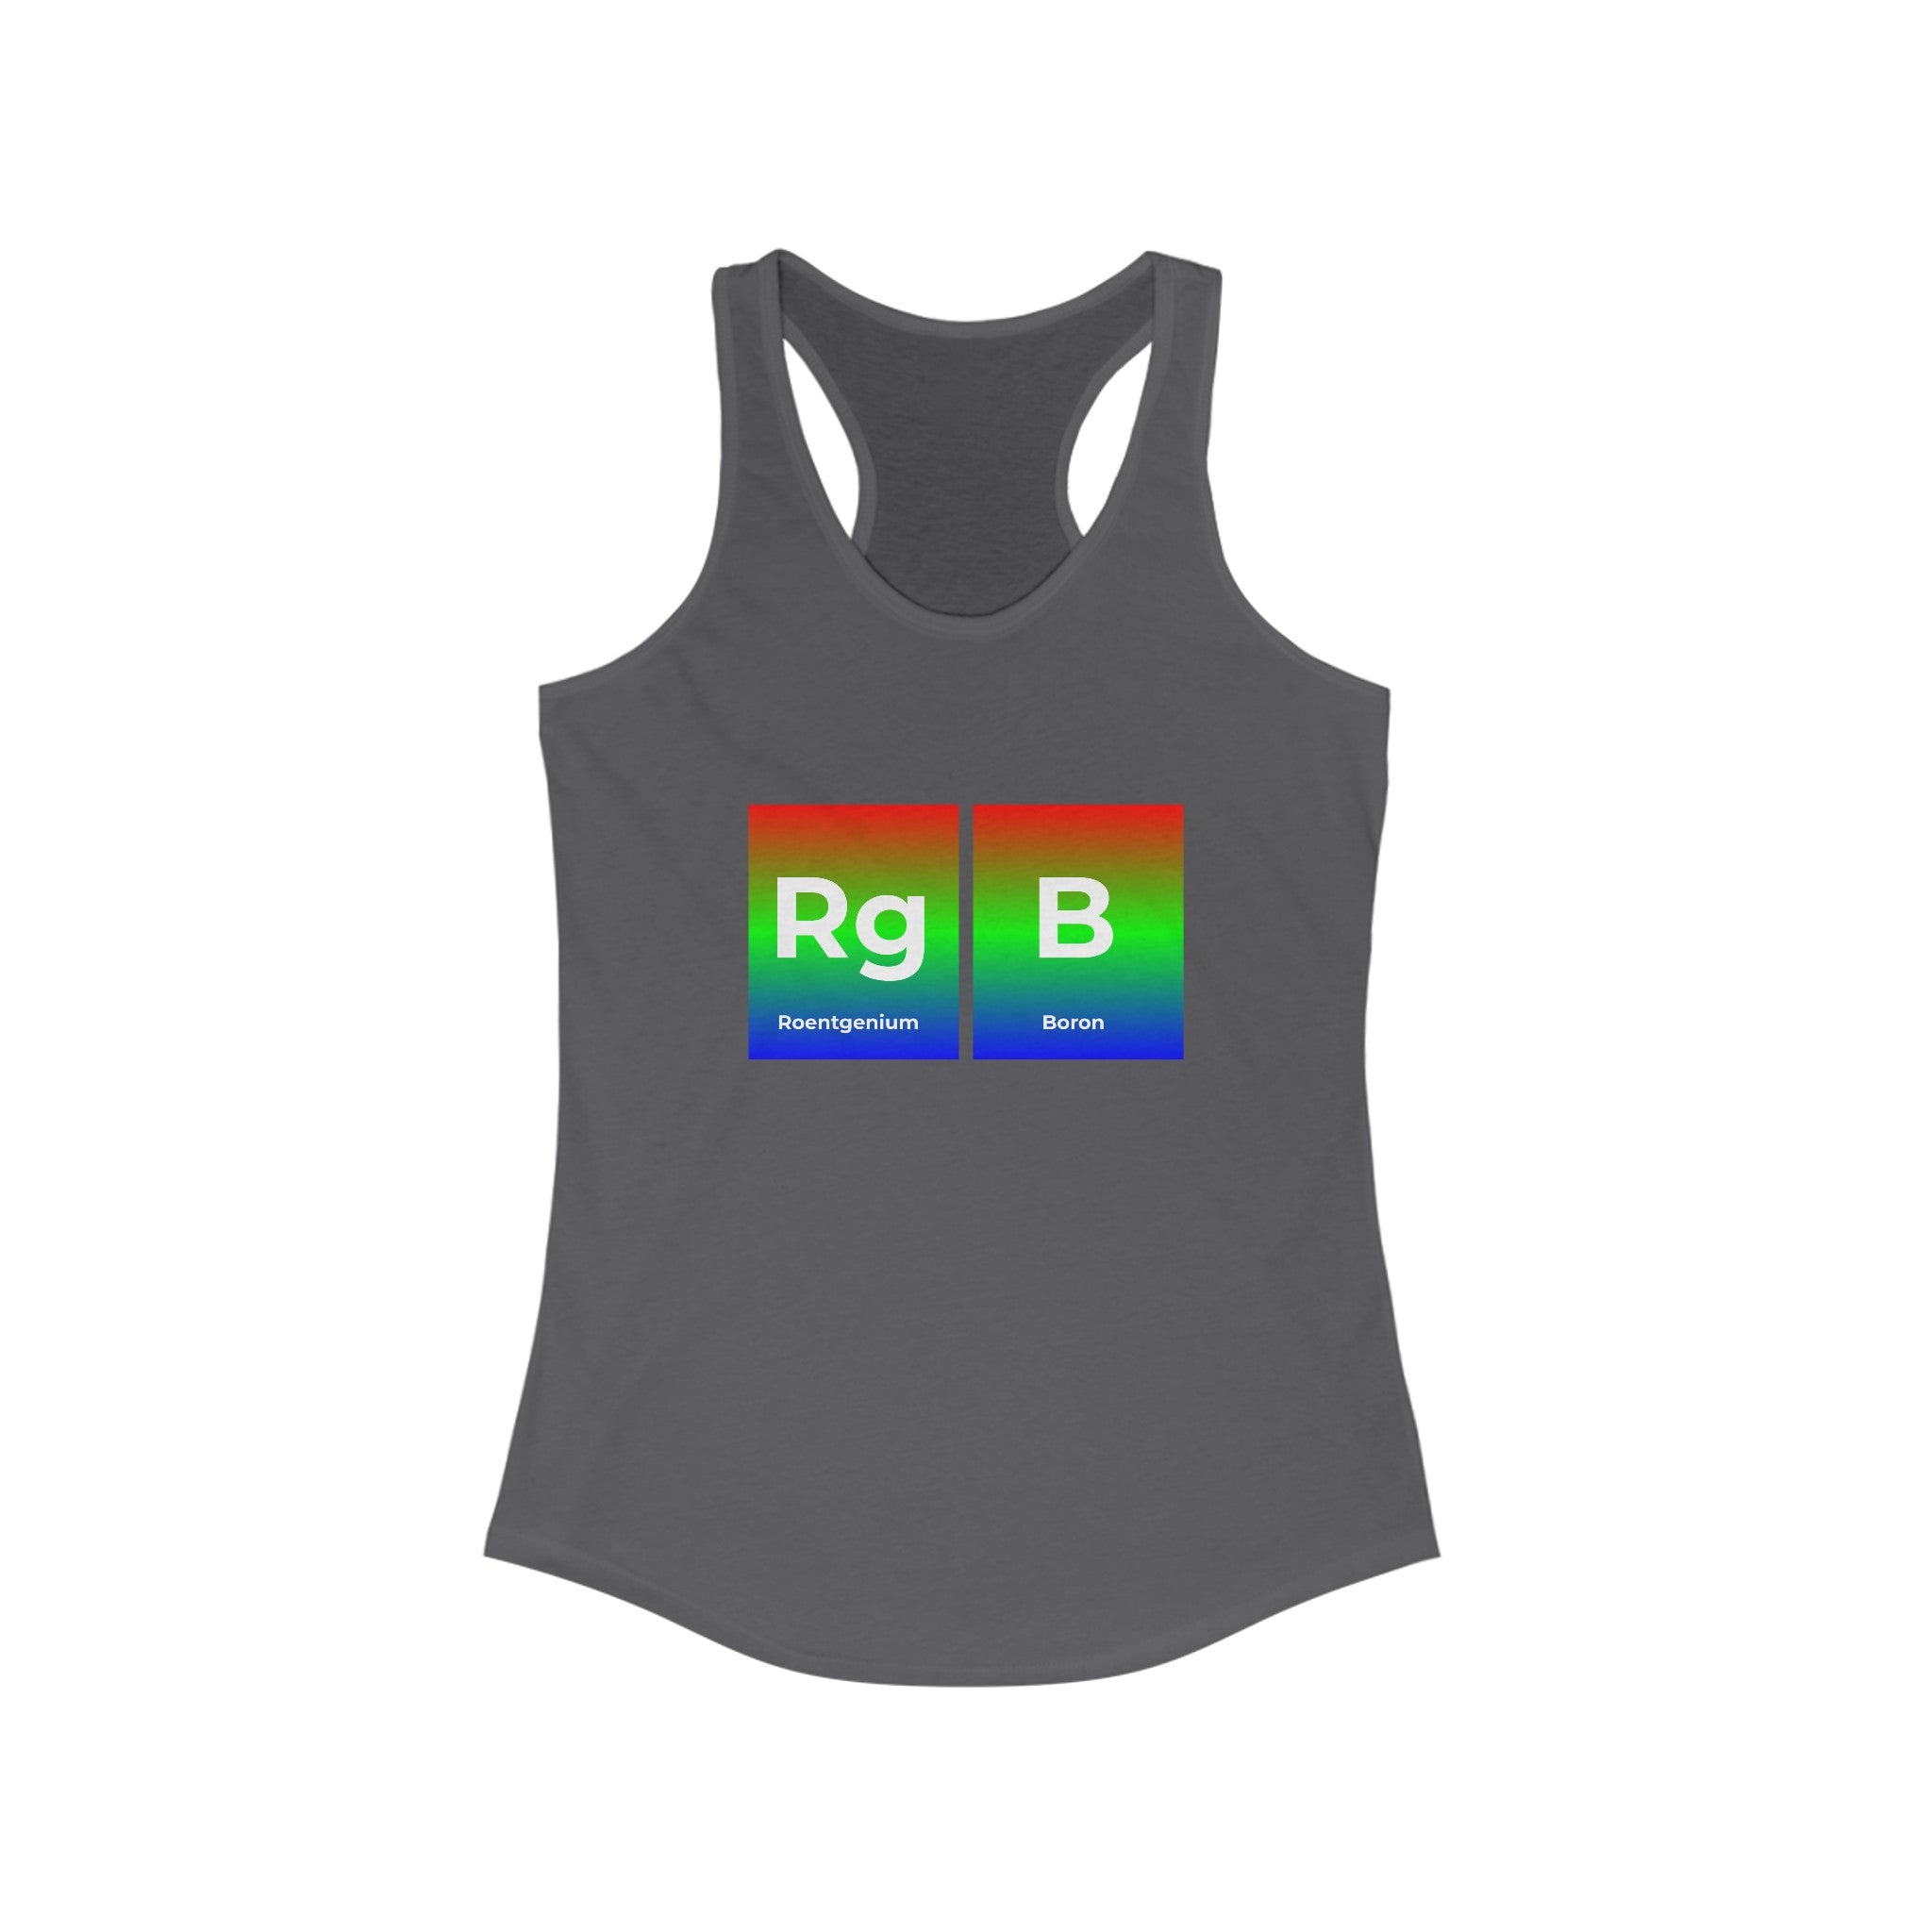 Dark gray RG-B - Women's Racerback Tank with a periodic table inspired graphic showing the symbols "Rg" and "B" on a gradient red-green-blue background, labeled Röntgenium and Boron. Perfect for an active lifestyle, this high-quality top combines style and science seamlessly.